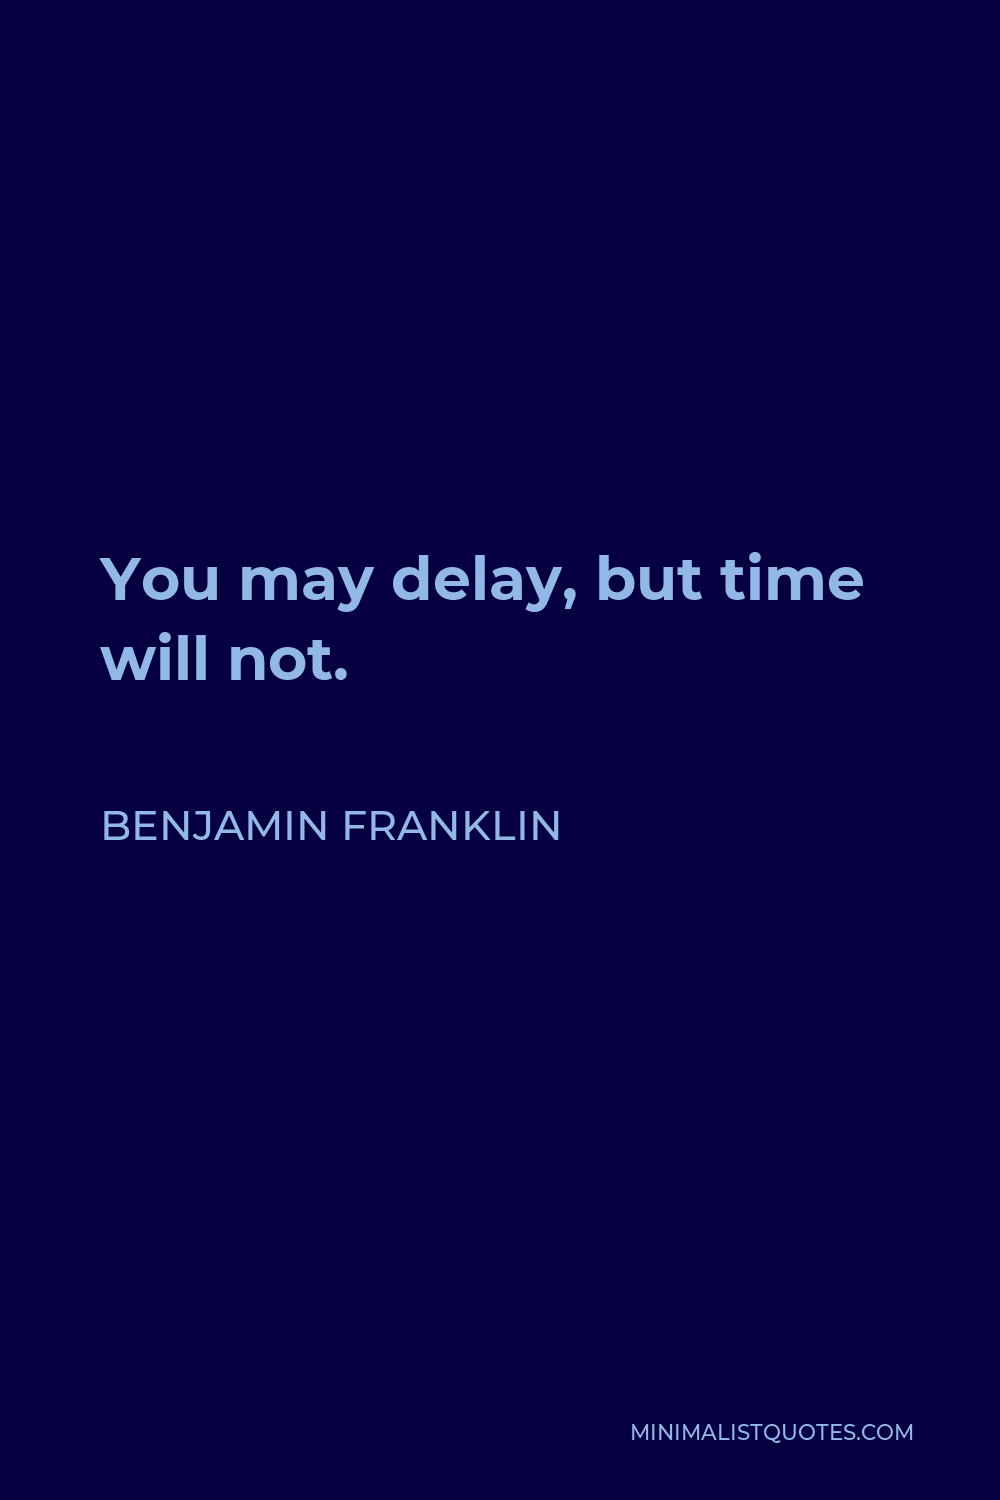 Benjamin Franklin Quote - You may delay, but time will not.